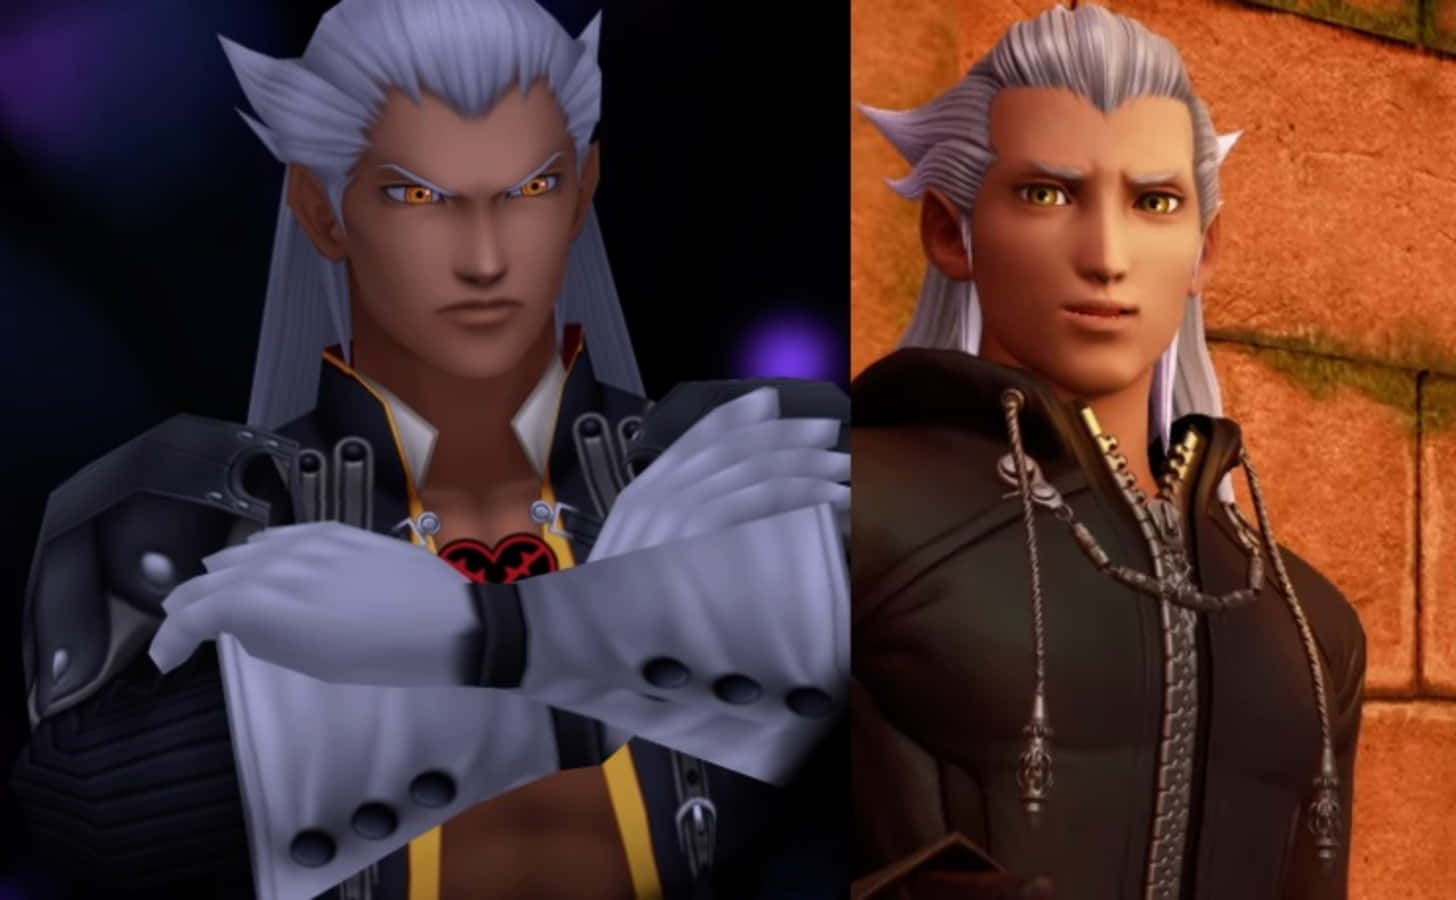 Ansem Seeker of Darkness poised for action Wallpaper